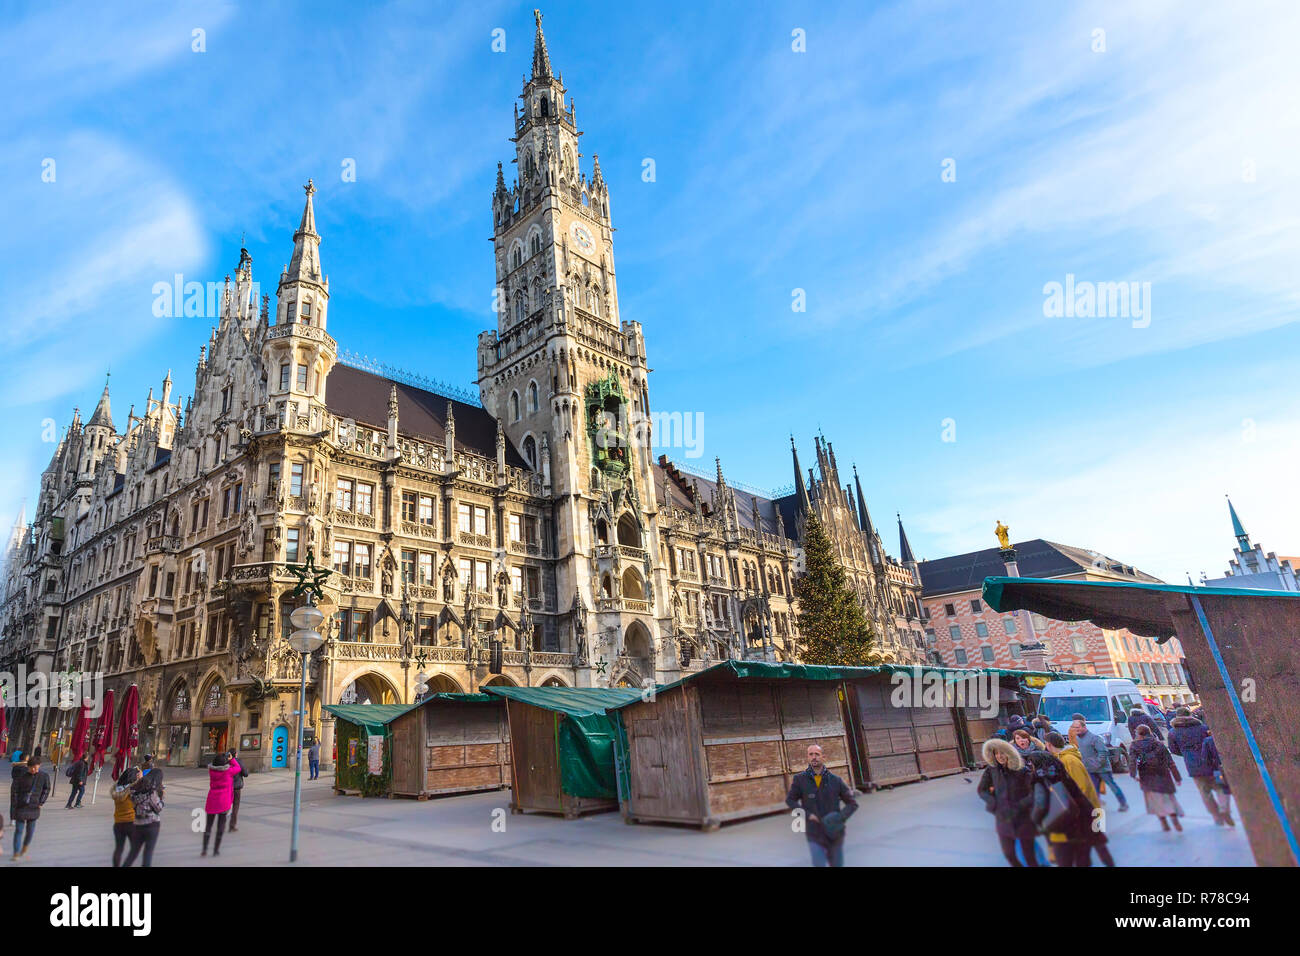 Munich, Germany - December 26, 2016: Marienplatz town hall rathaus and  Christmas market after holidays Stock Photo - Alamy